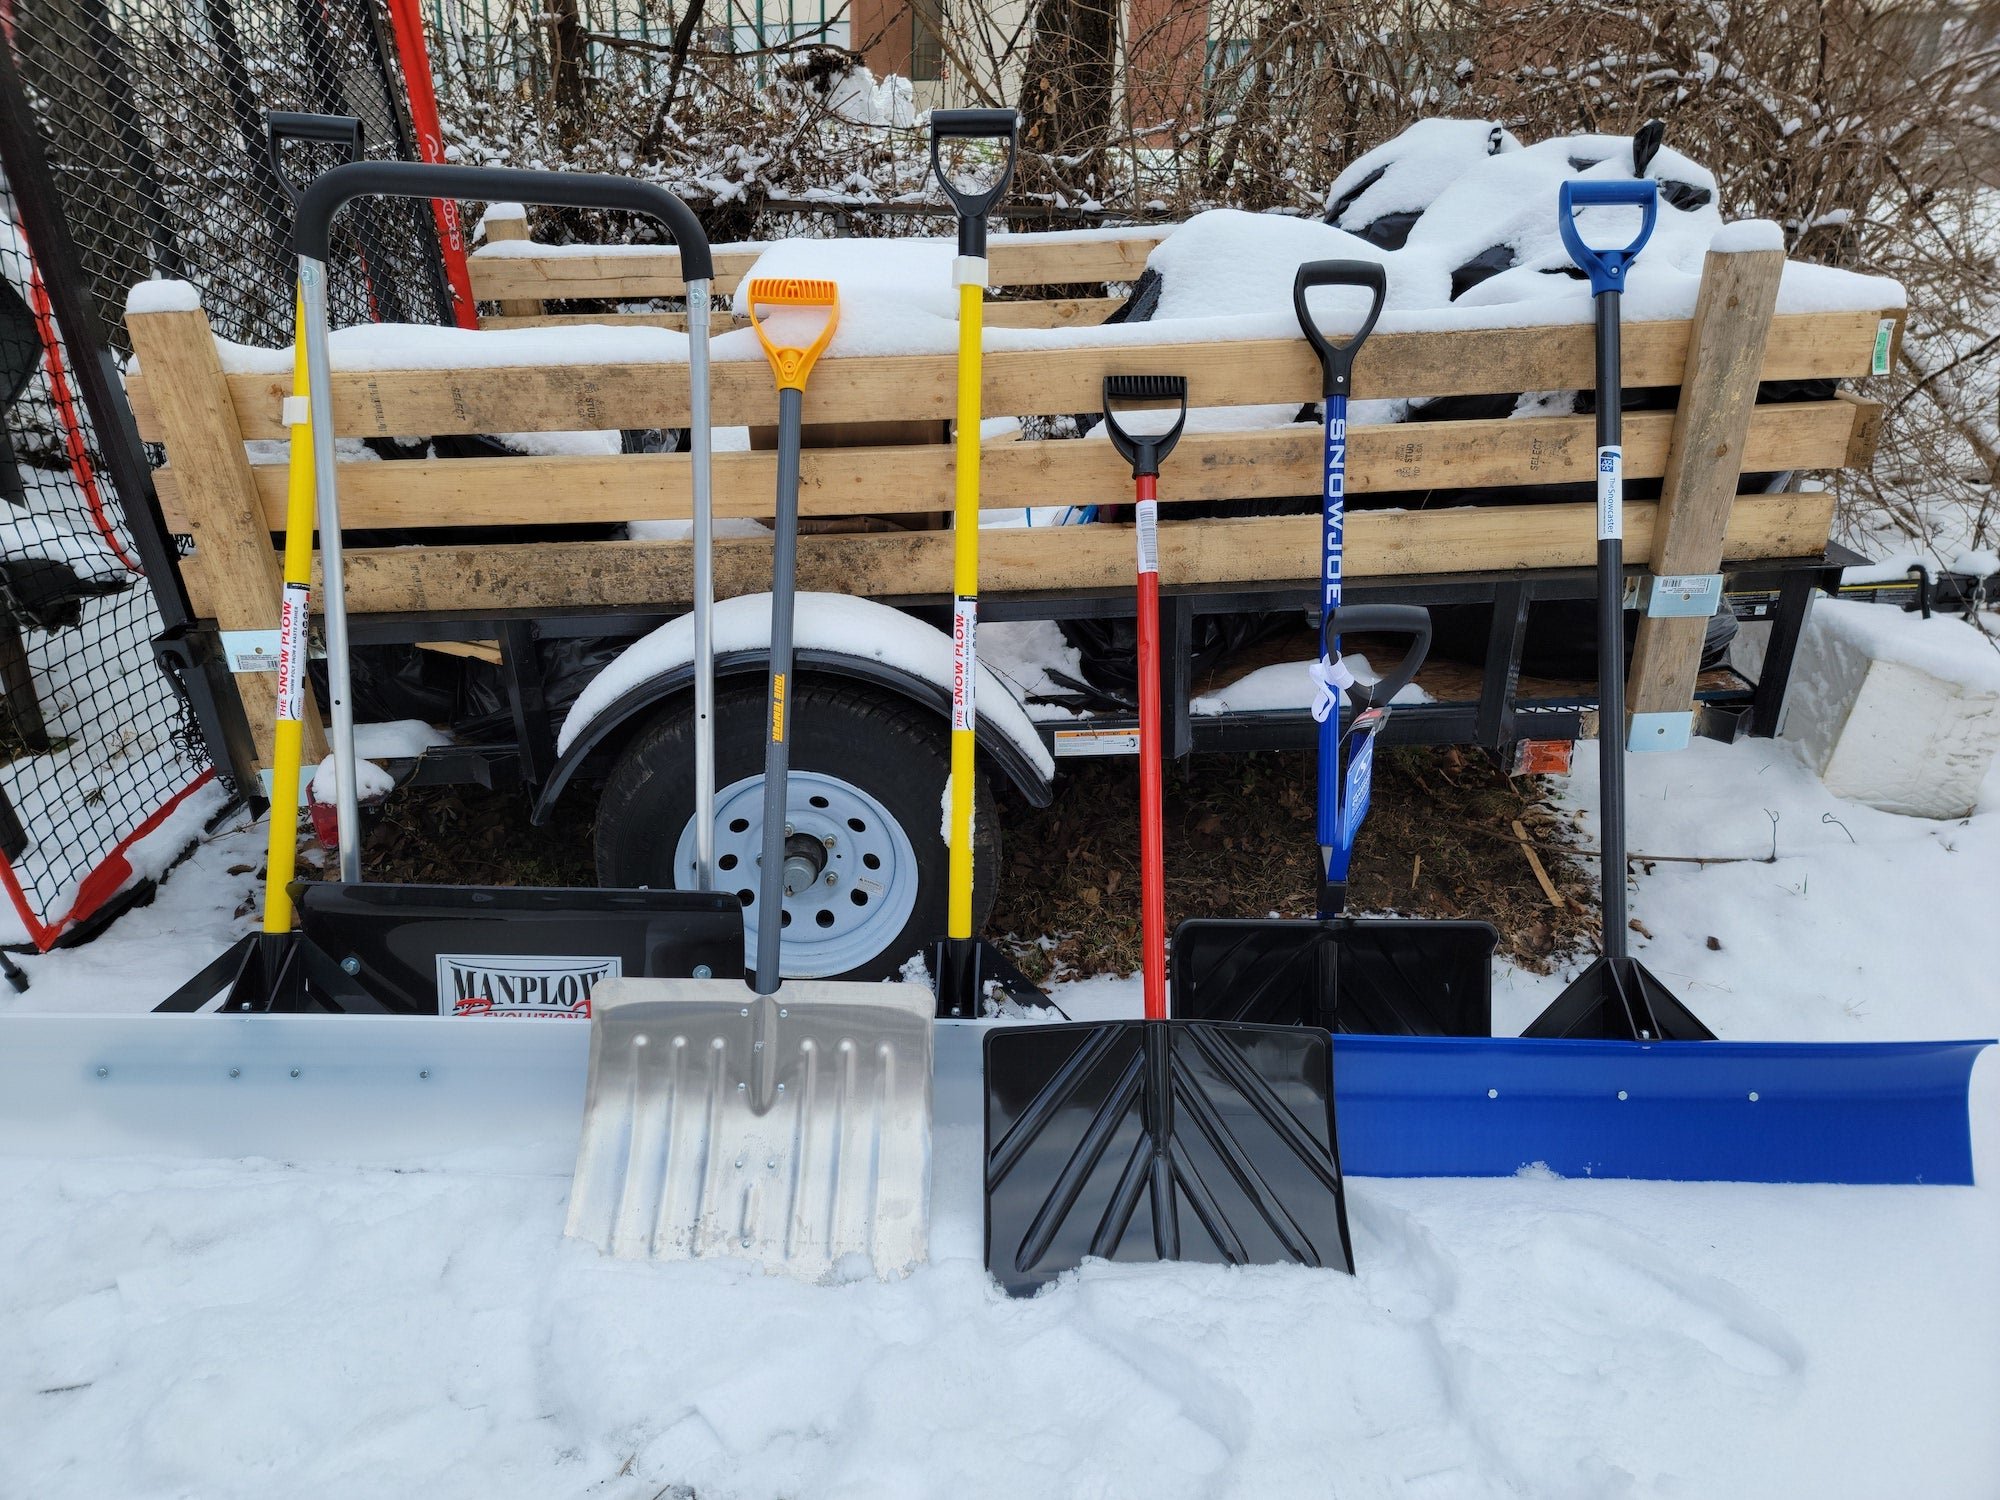 The Best Snow Shovels of 2022